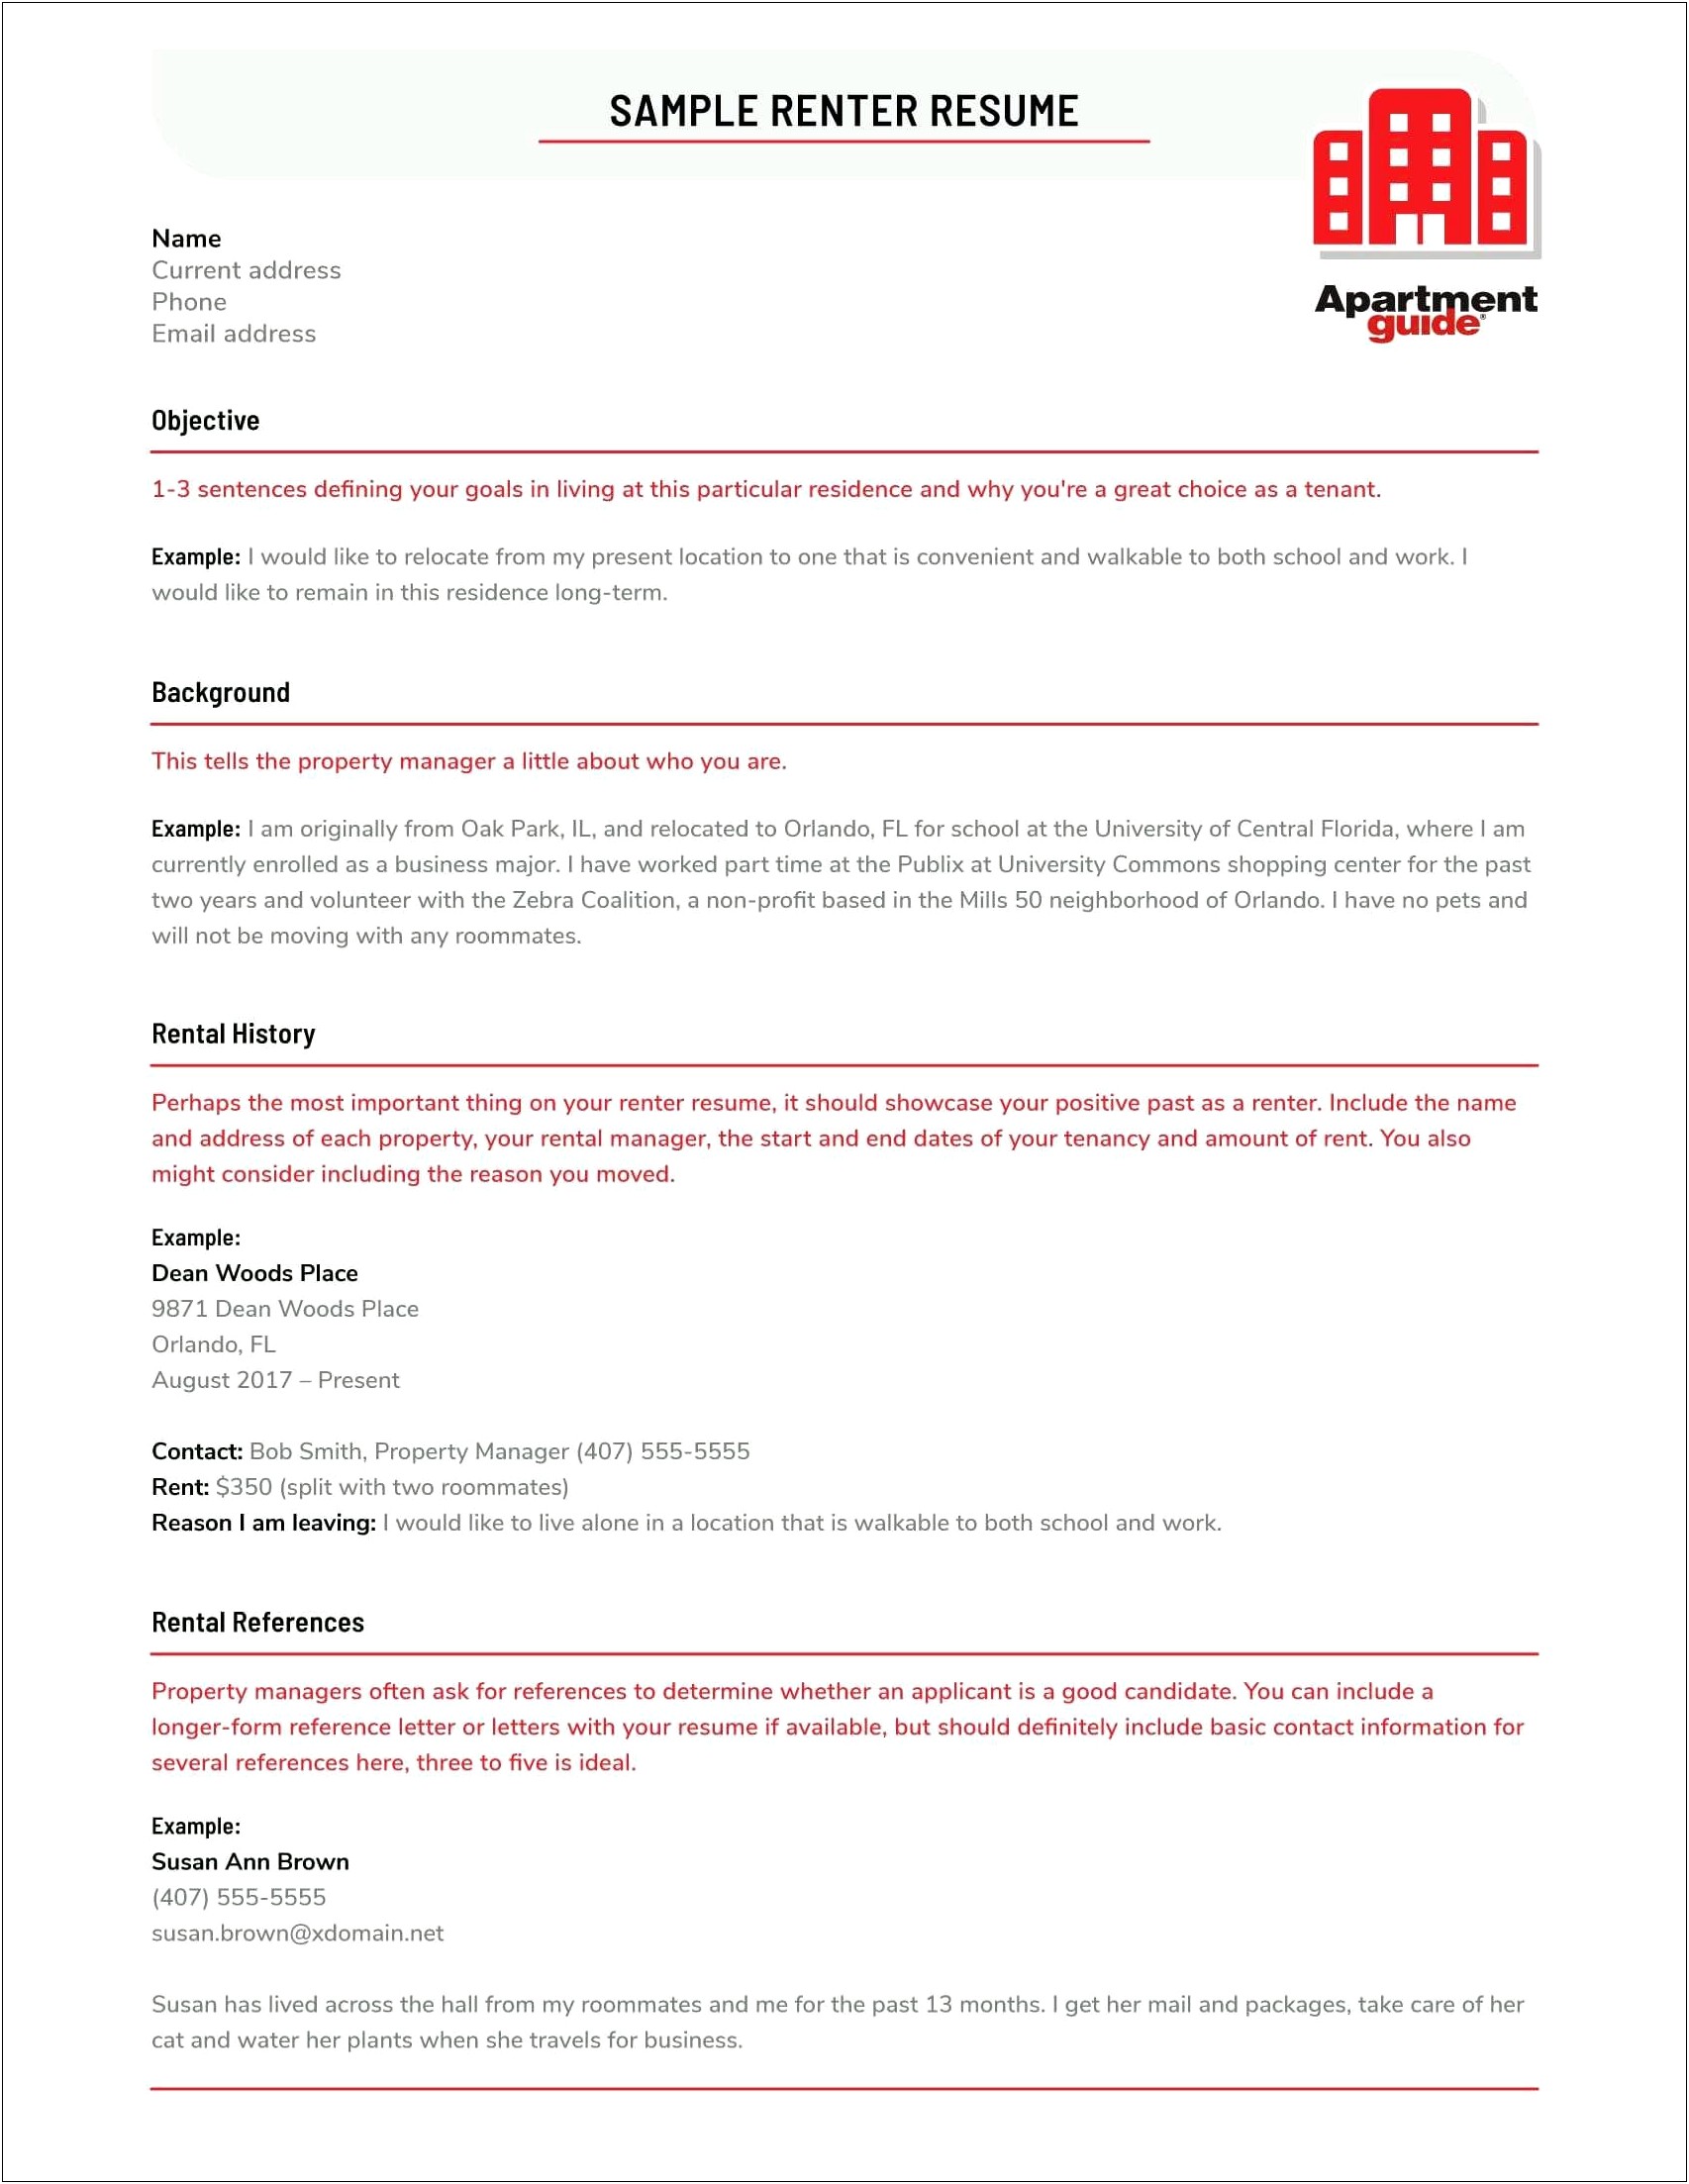 Example Of A Rental Resume